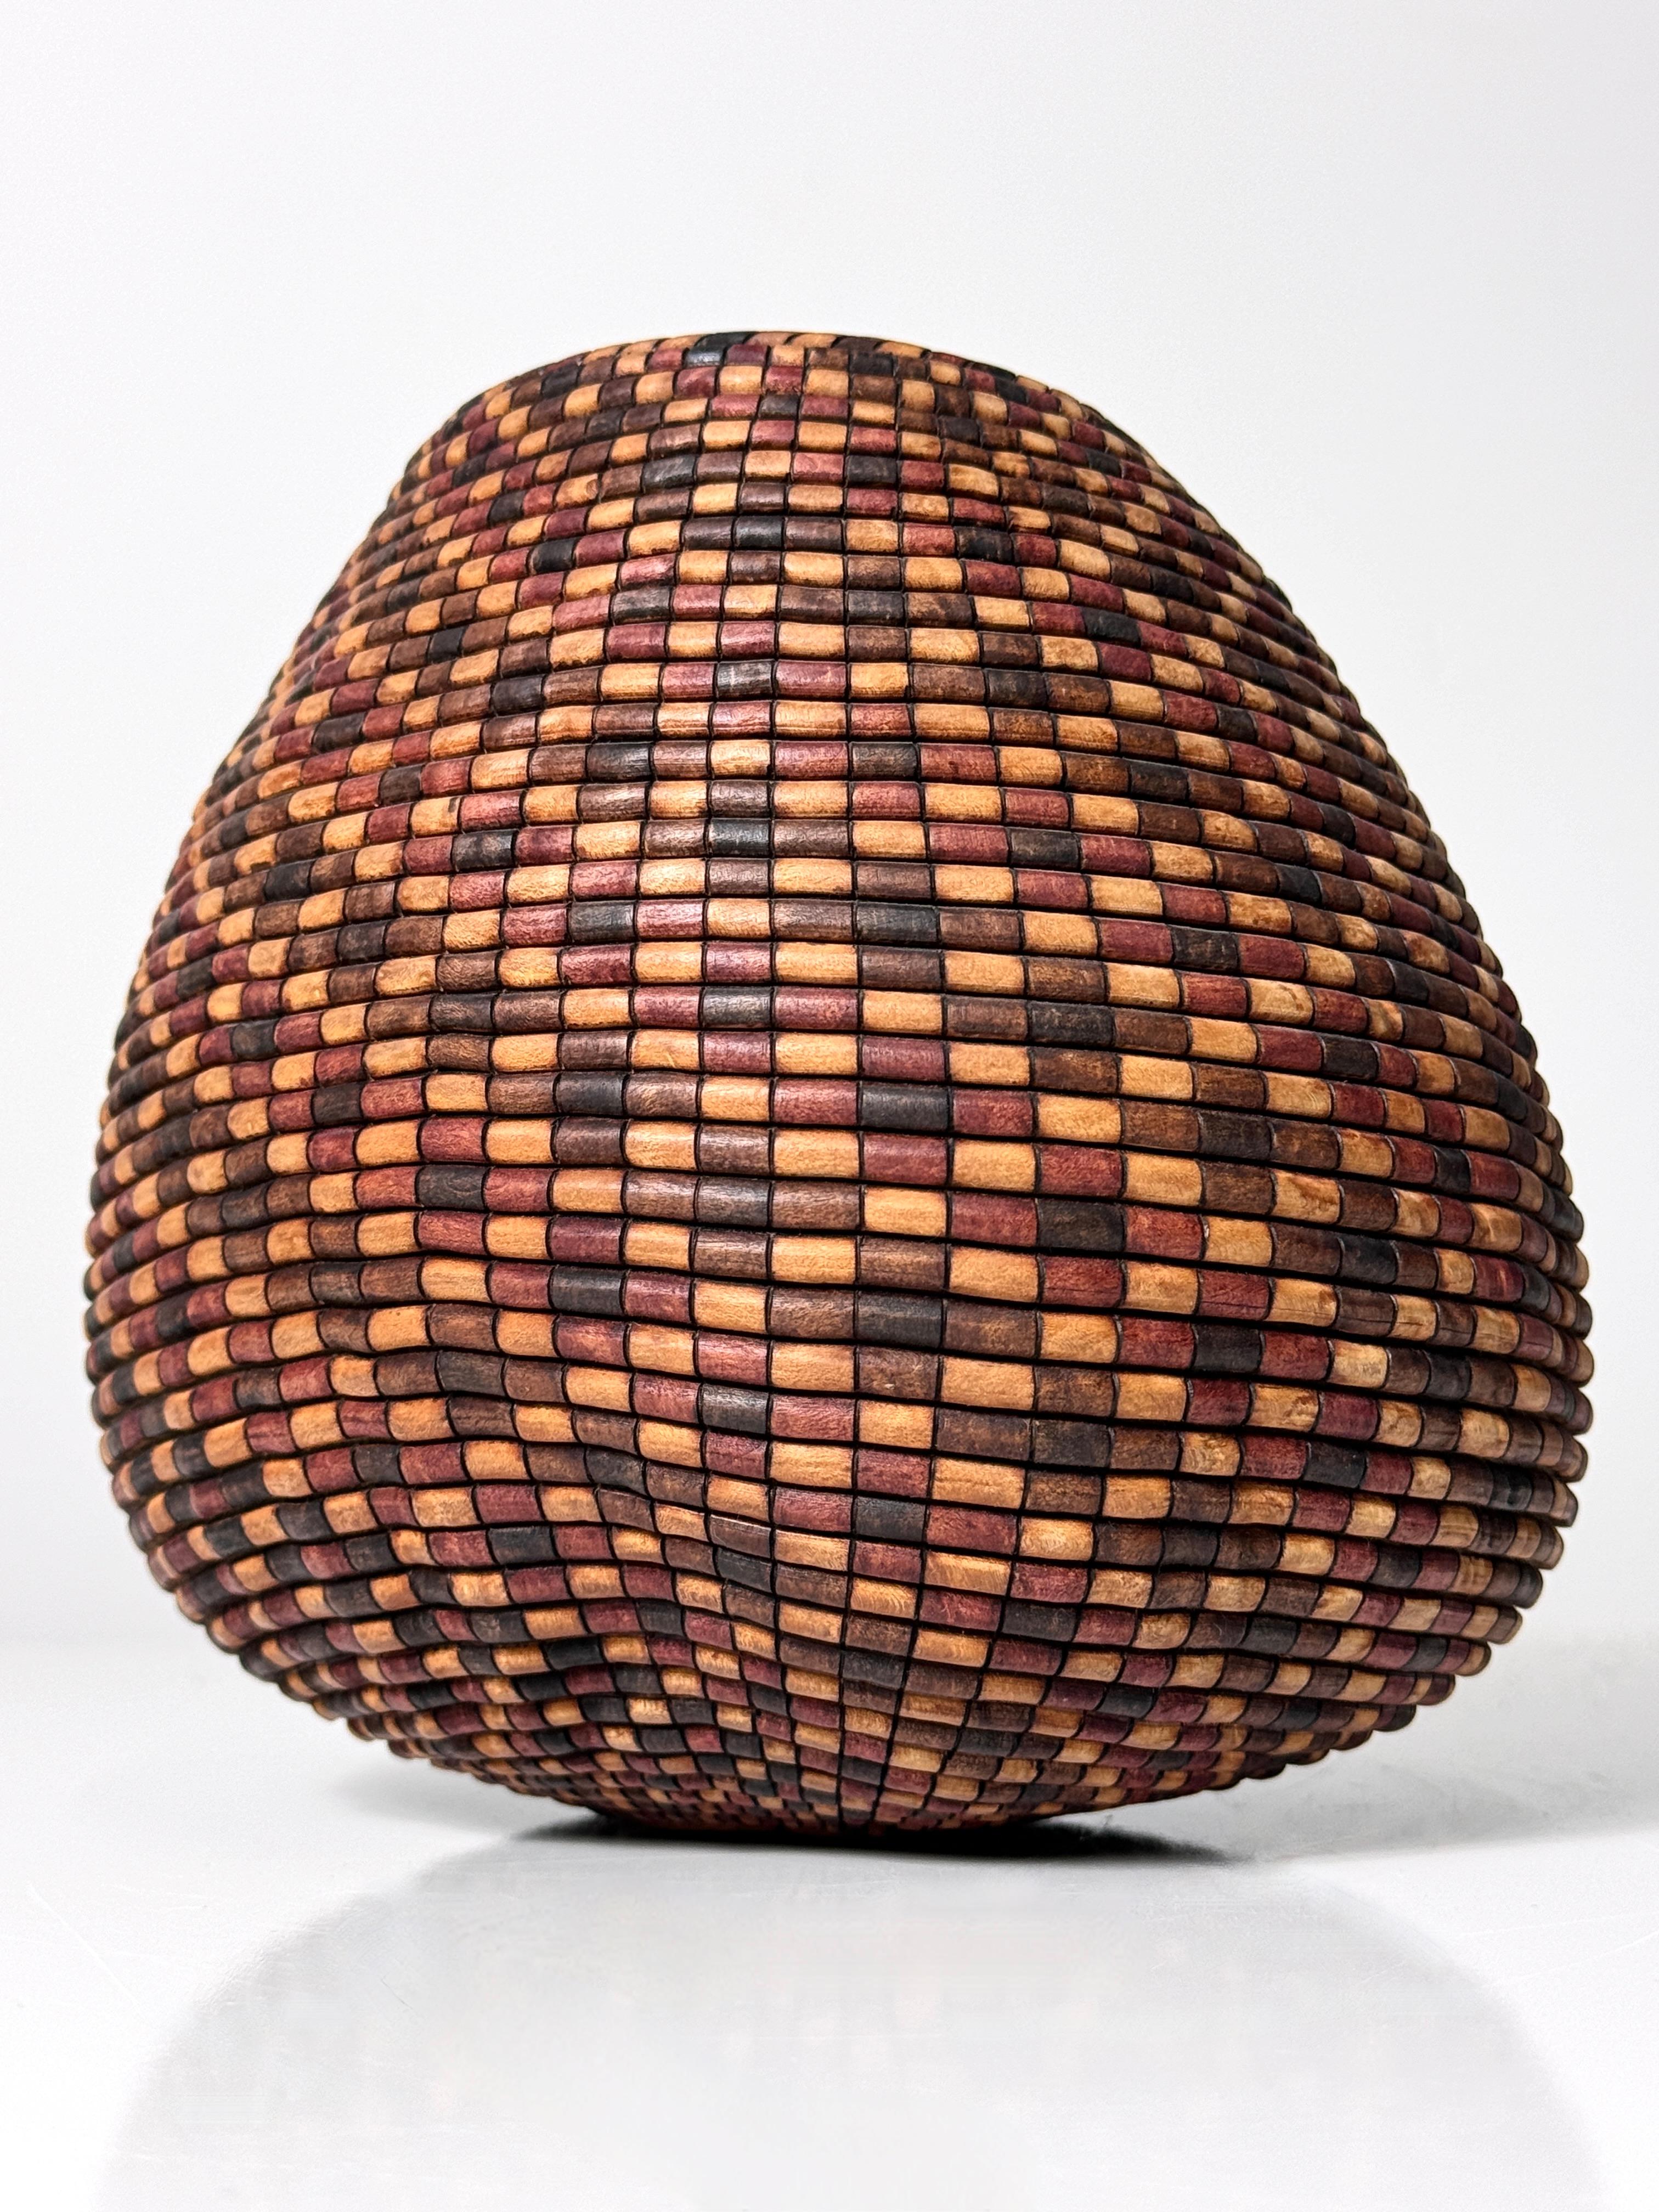 Turned wood vessel by American craftsman David Nittmann circa 1990s
Titled Black Lace of the Basket Illusion Series

Incredible piece in turned Madrone is burned and dyed to resemble the appearance of a basket
Signed and titled to underside

7 inch